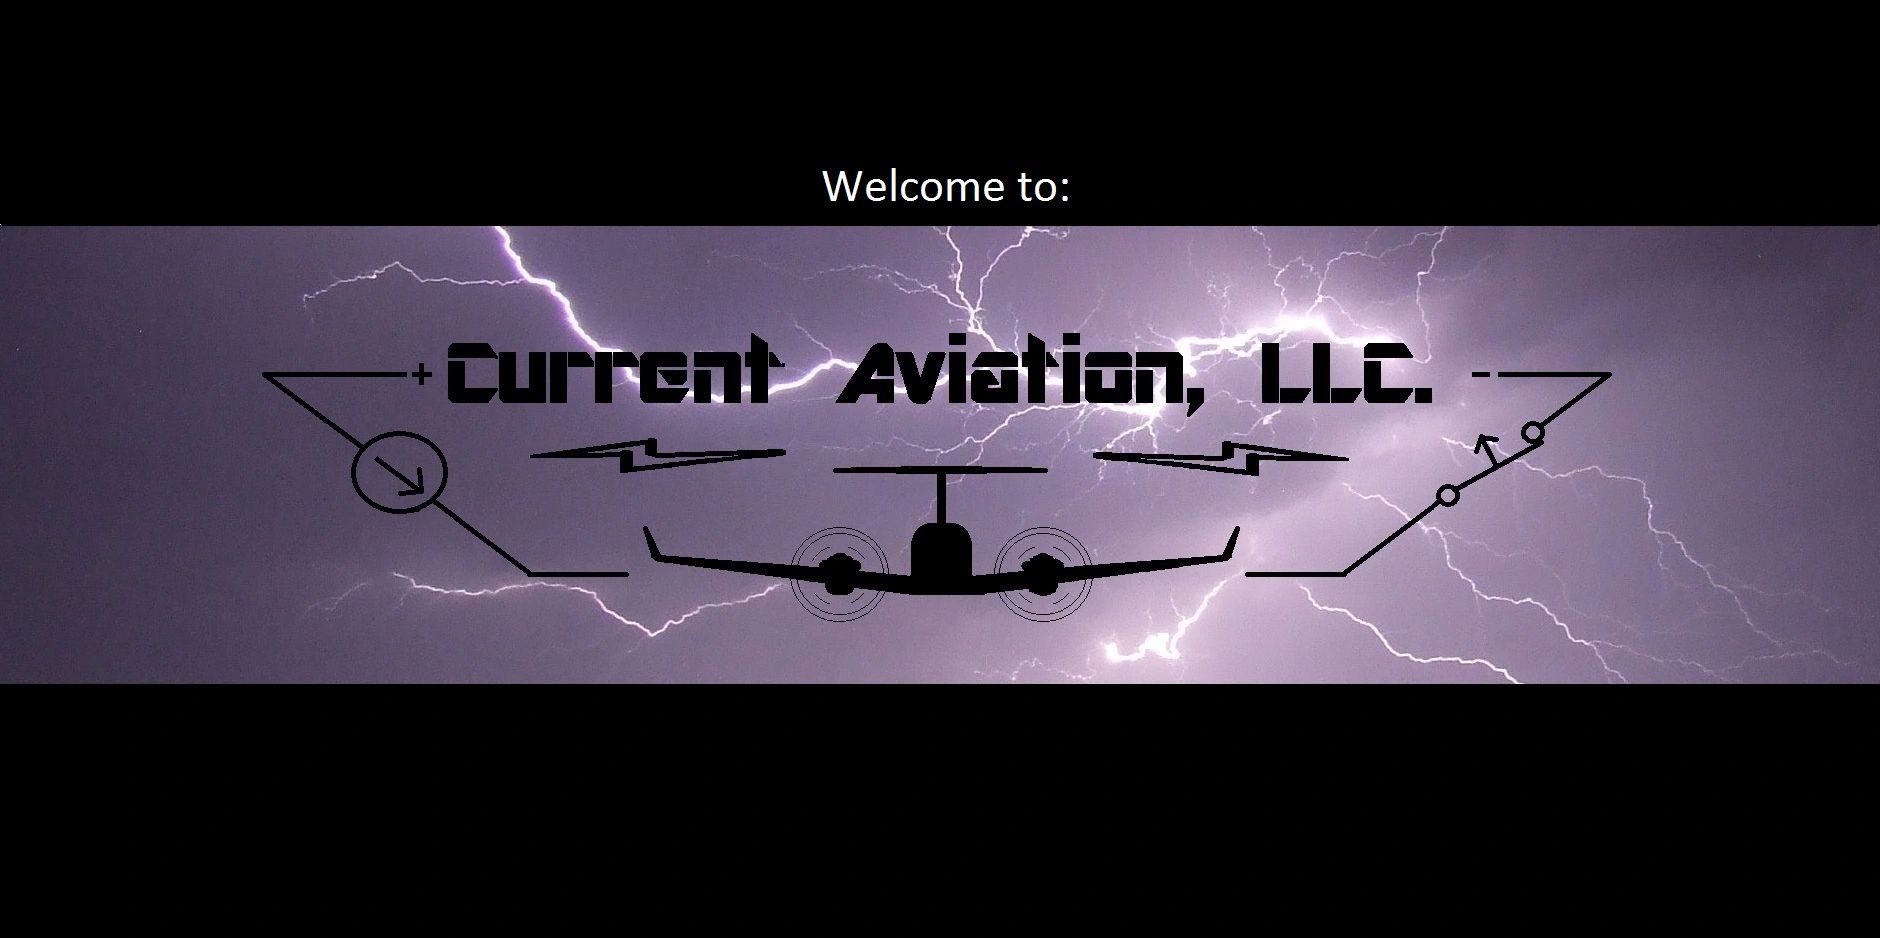 Current Aviation specializing in Aircraft Accessory Exchange/Overhaul for Pumps, Blowers & Actuators